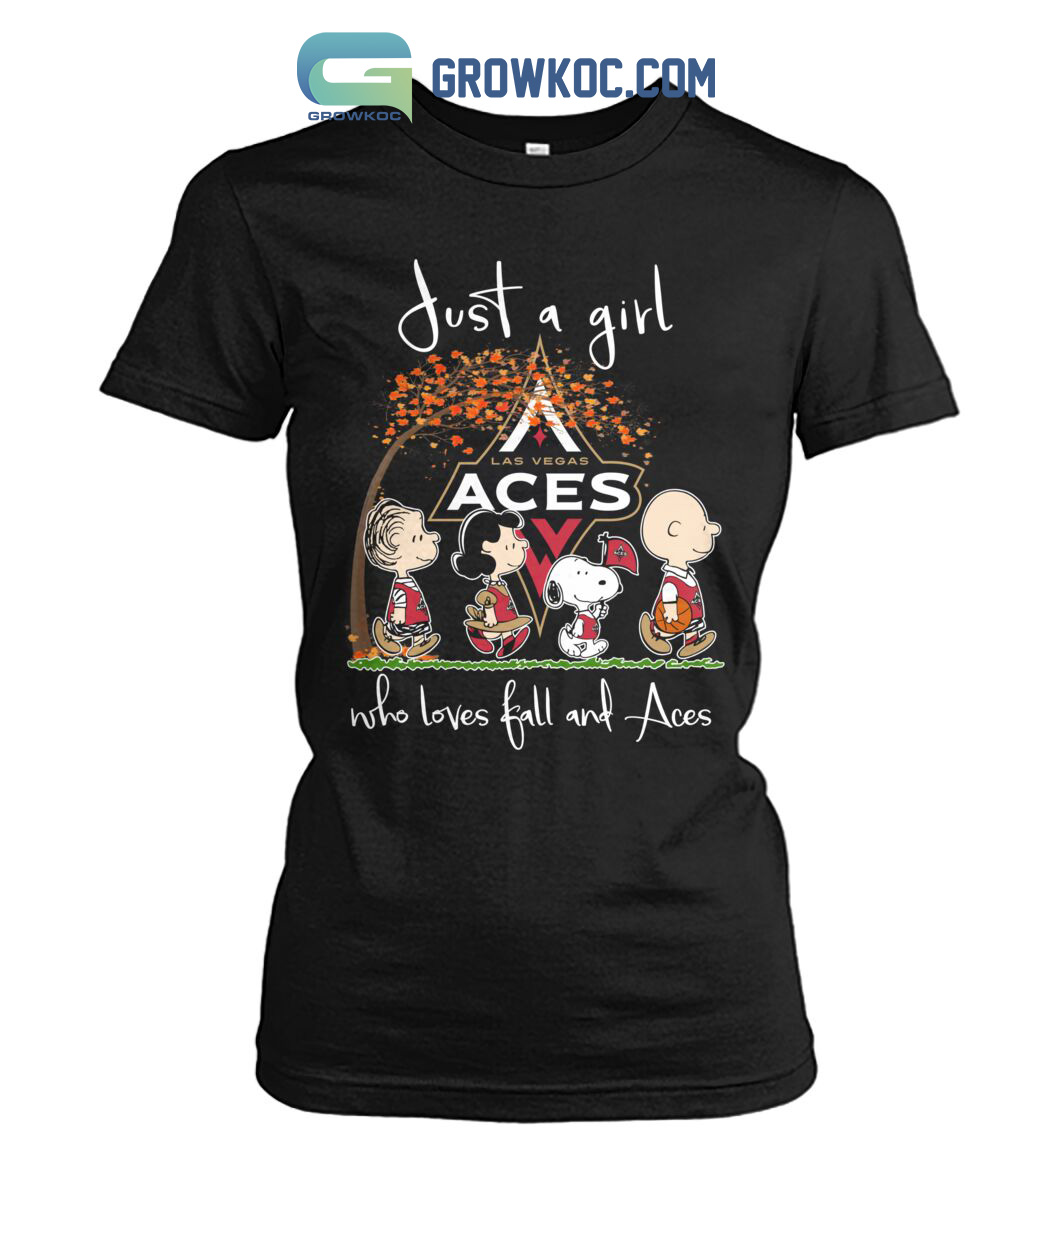 Just A Girl Who Loves Fall And Las Vegas Aces T Shirt - Growkoc